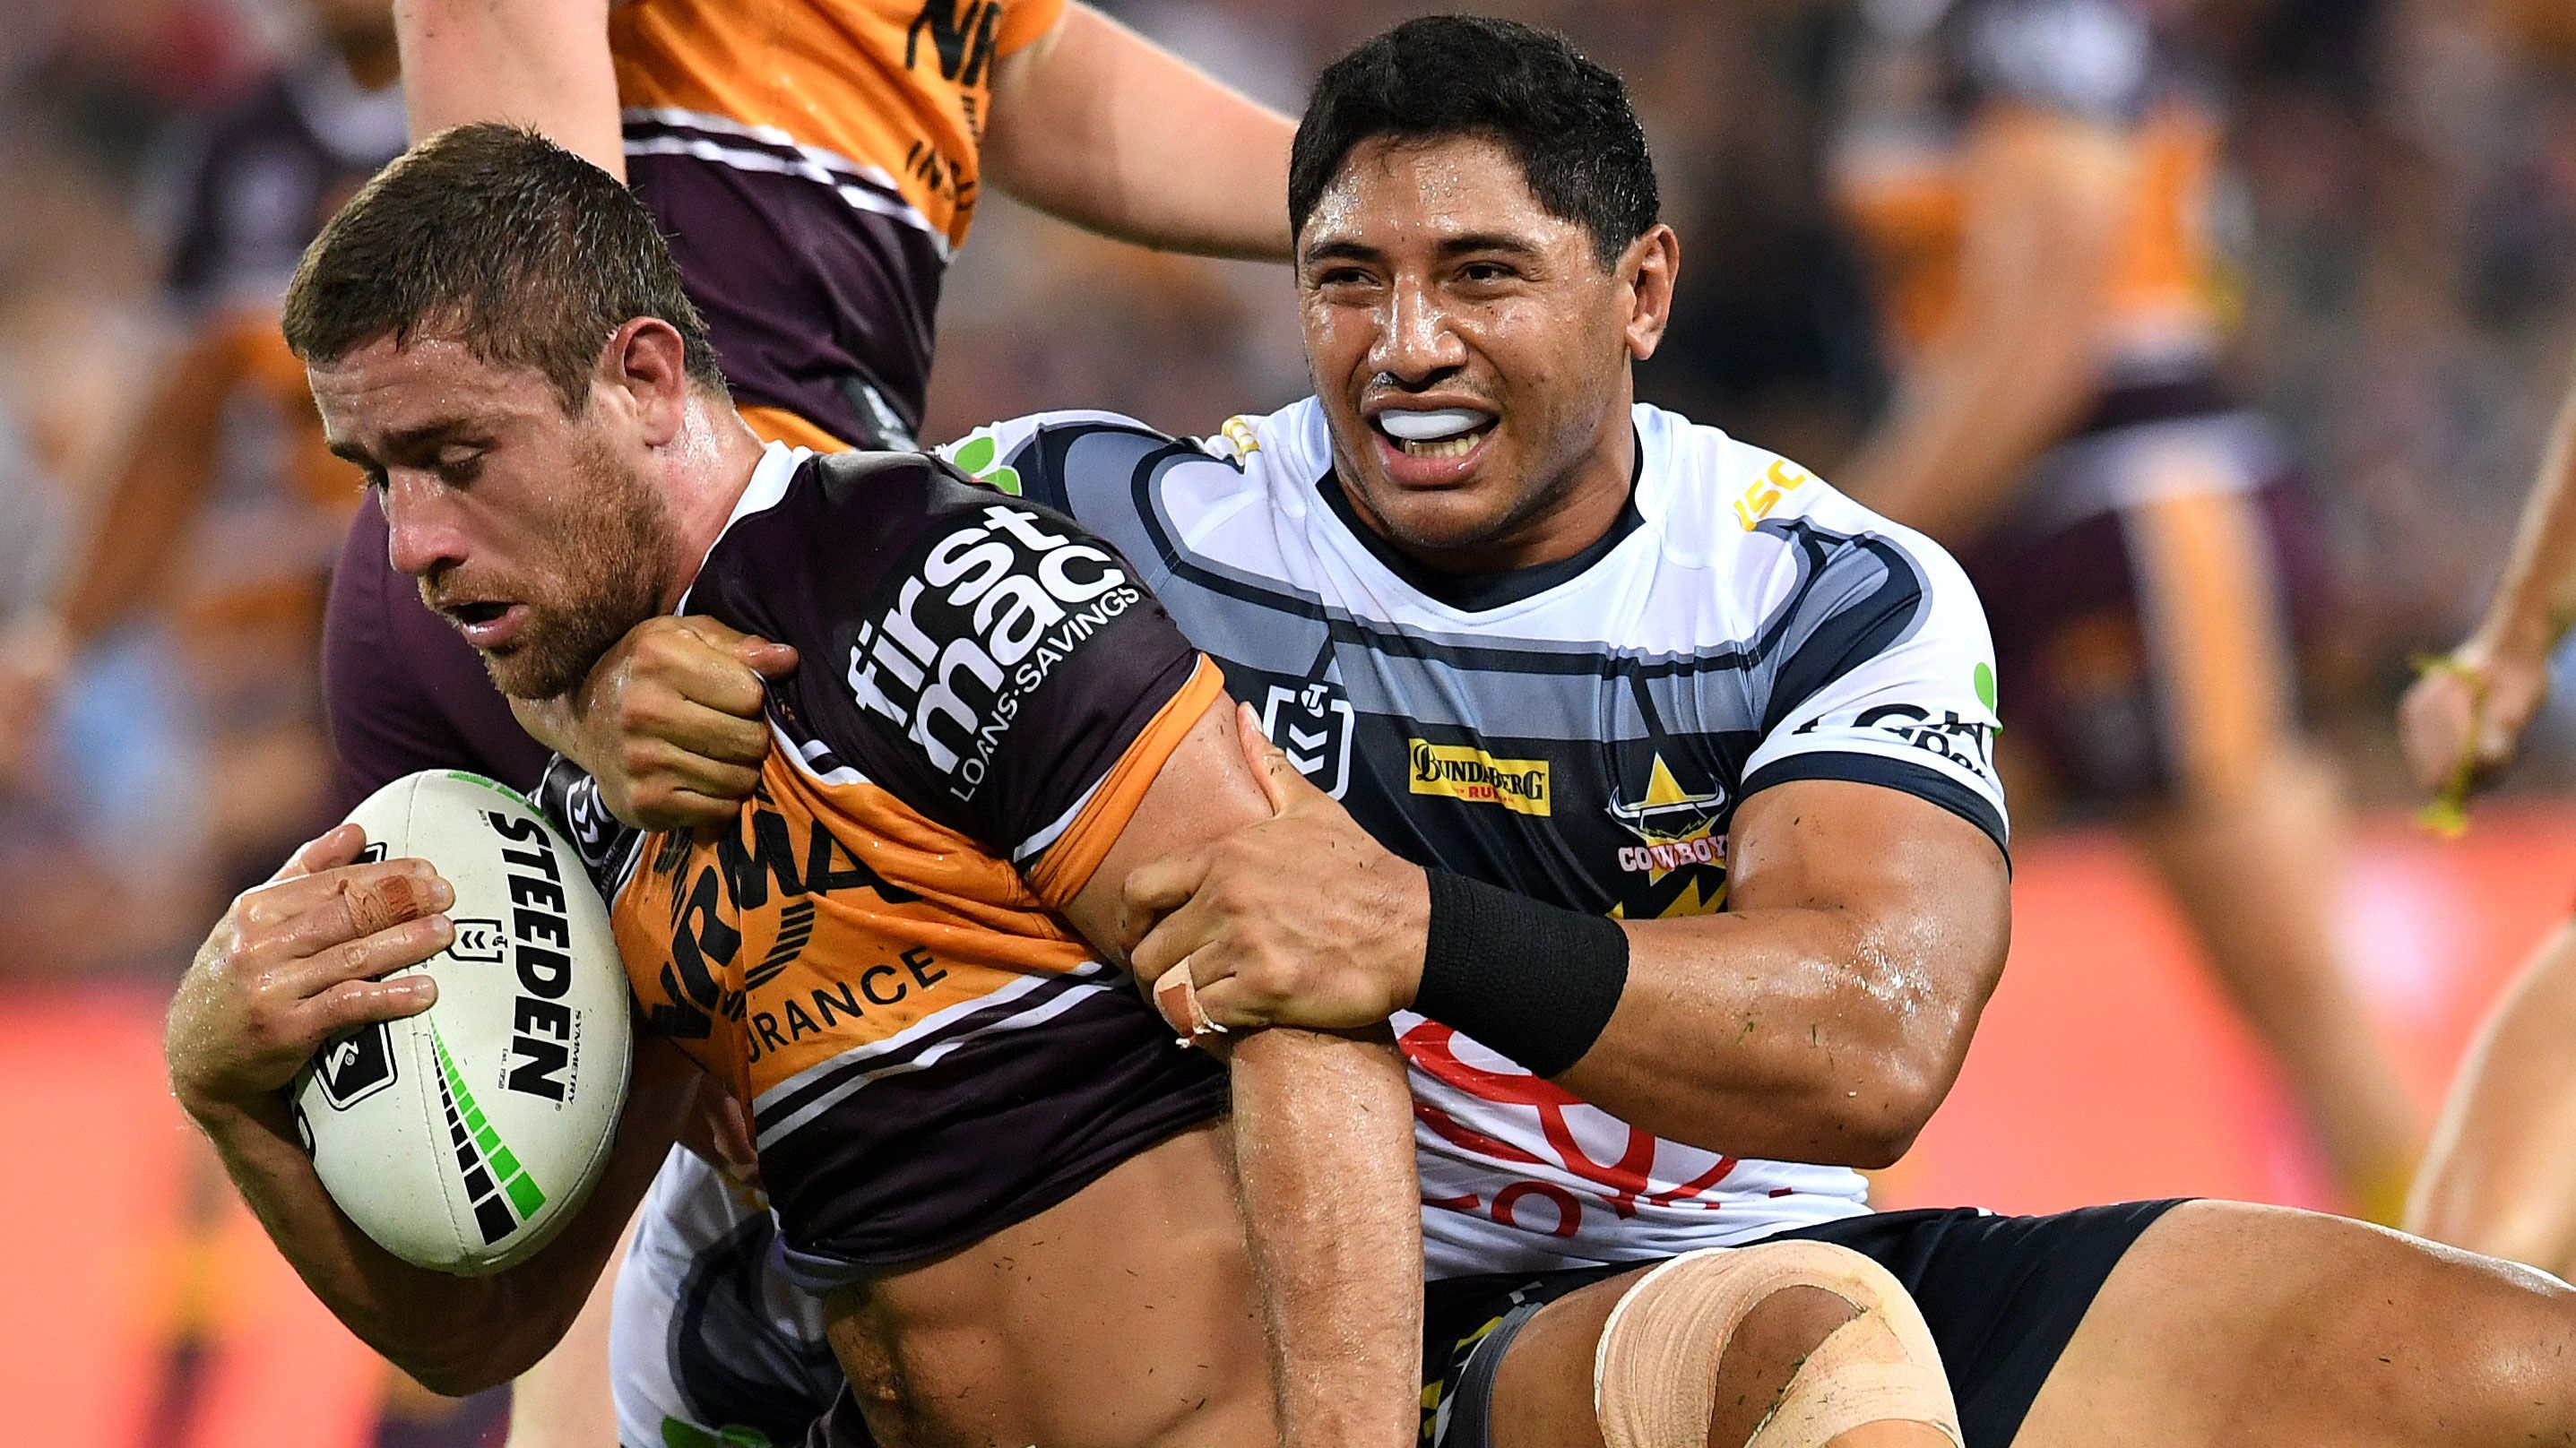 Taumalolo sidelined for up to 10 weeks